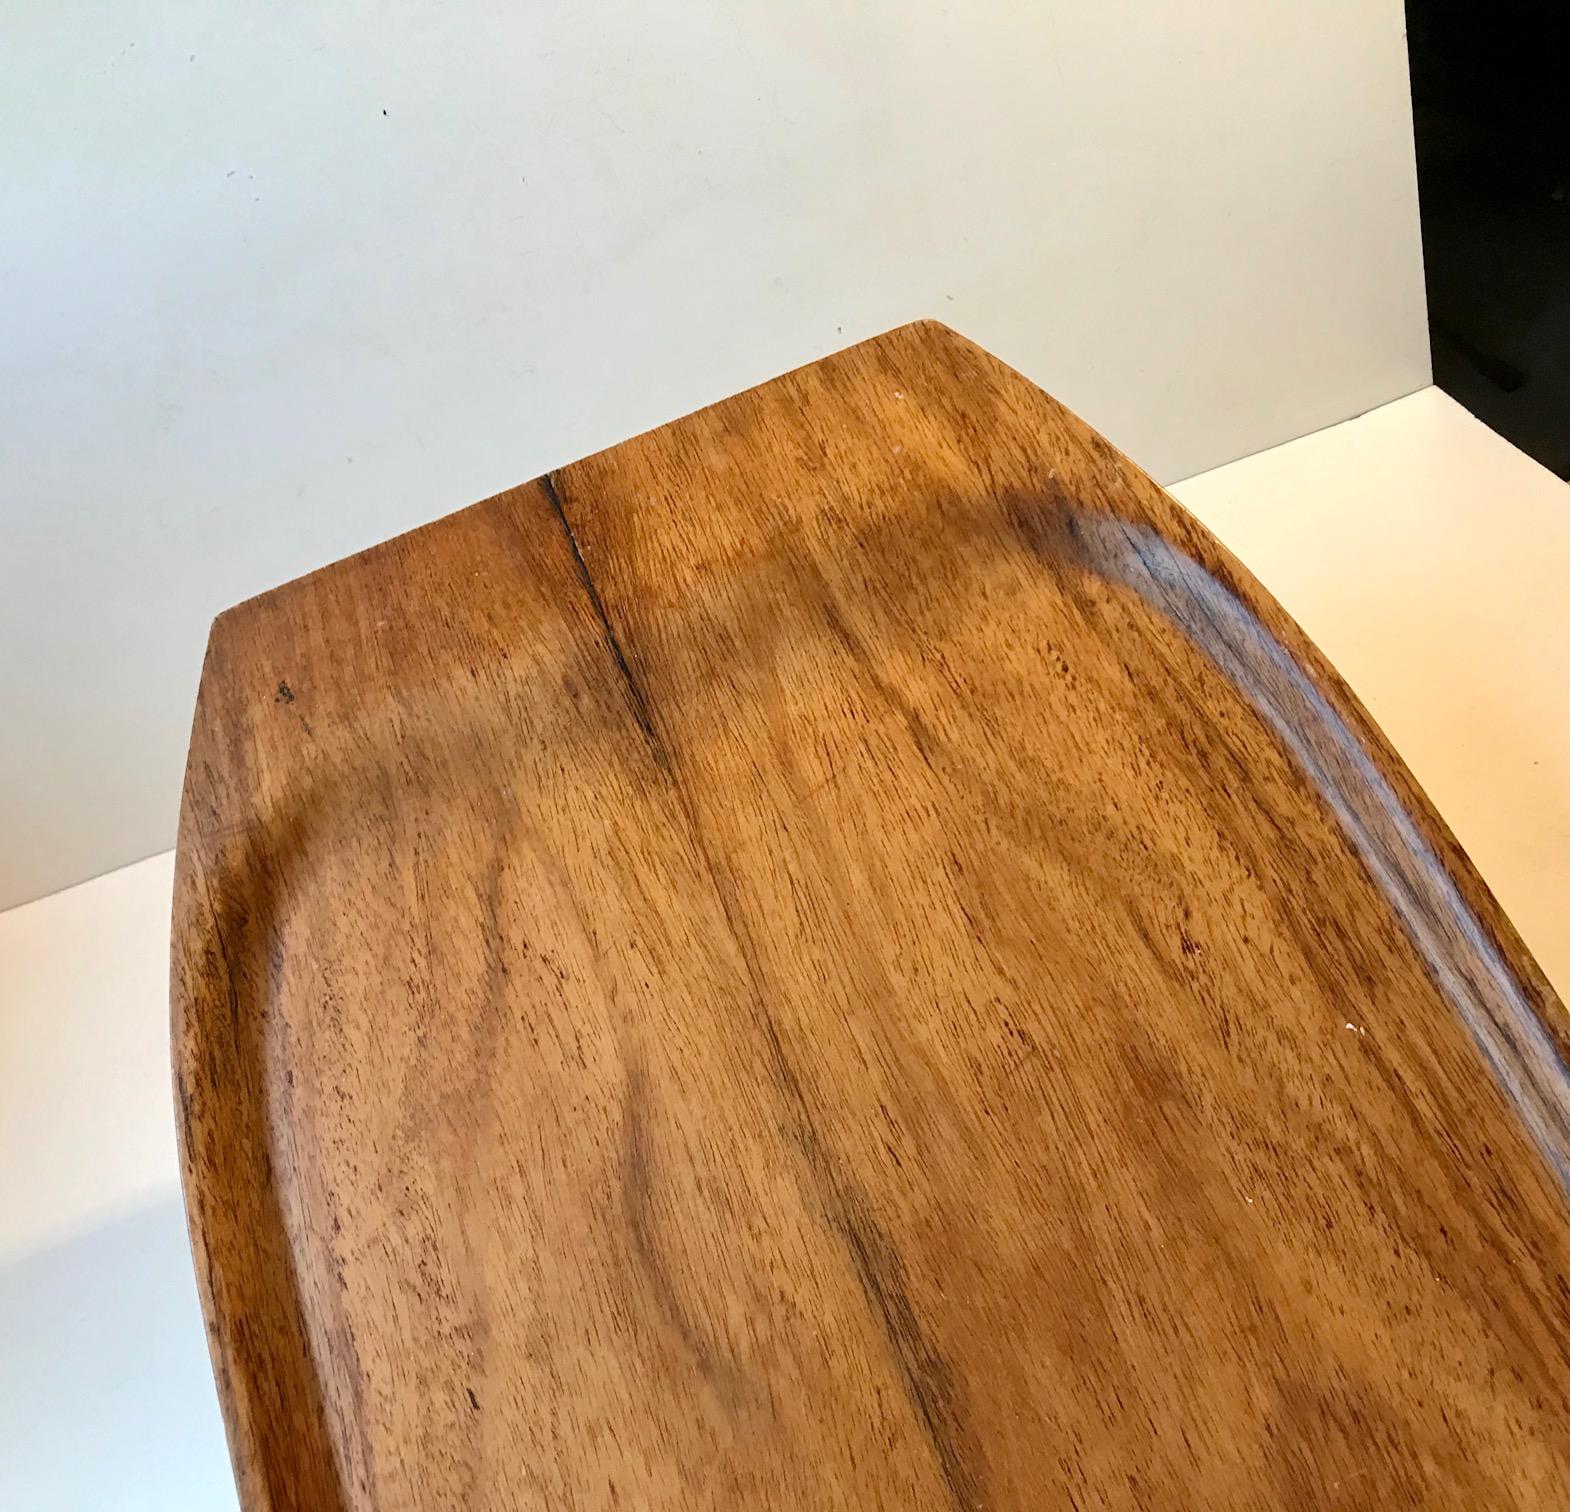 Large oblong serving tray made from rosewood veneer (East Indian Type). Suitable as a bed serving tray due to its size and raised edges. It was made in Denmark during the 1960s by Åry. Measurements: 60.5x32x3 cm.